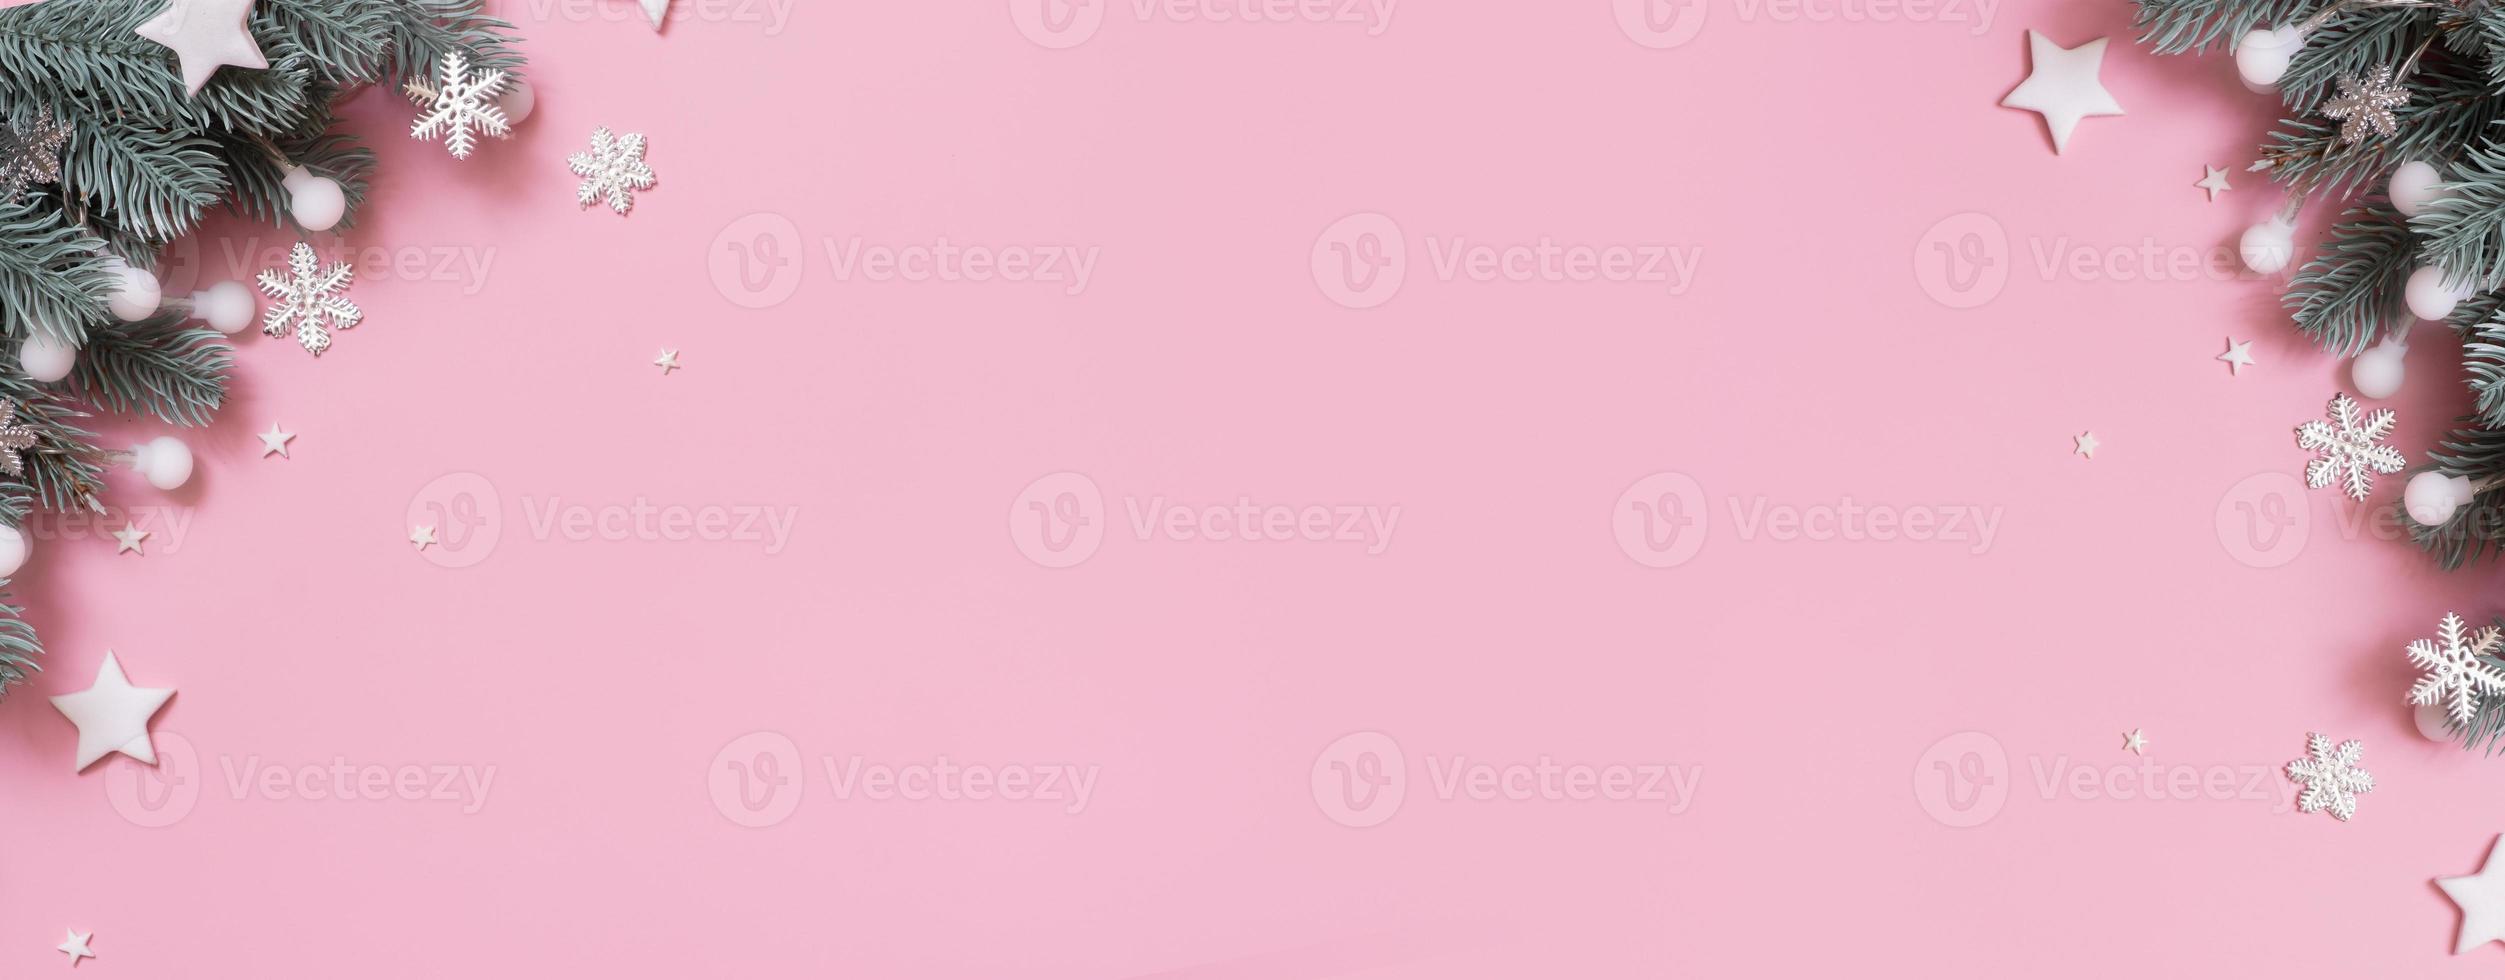 Banner with Cristmas New Year decoration top view, flat lay on pink background with copy space photo